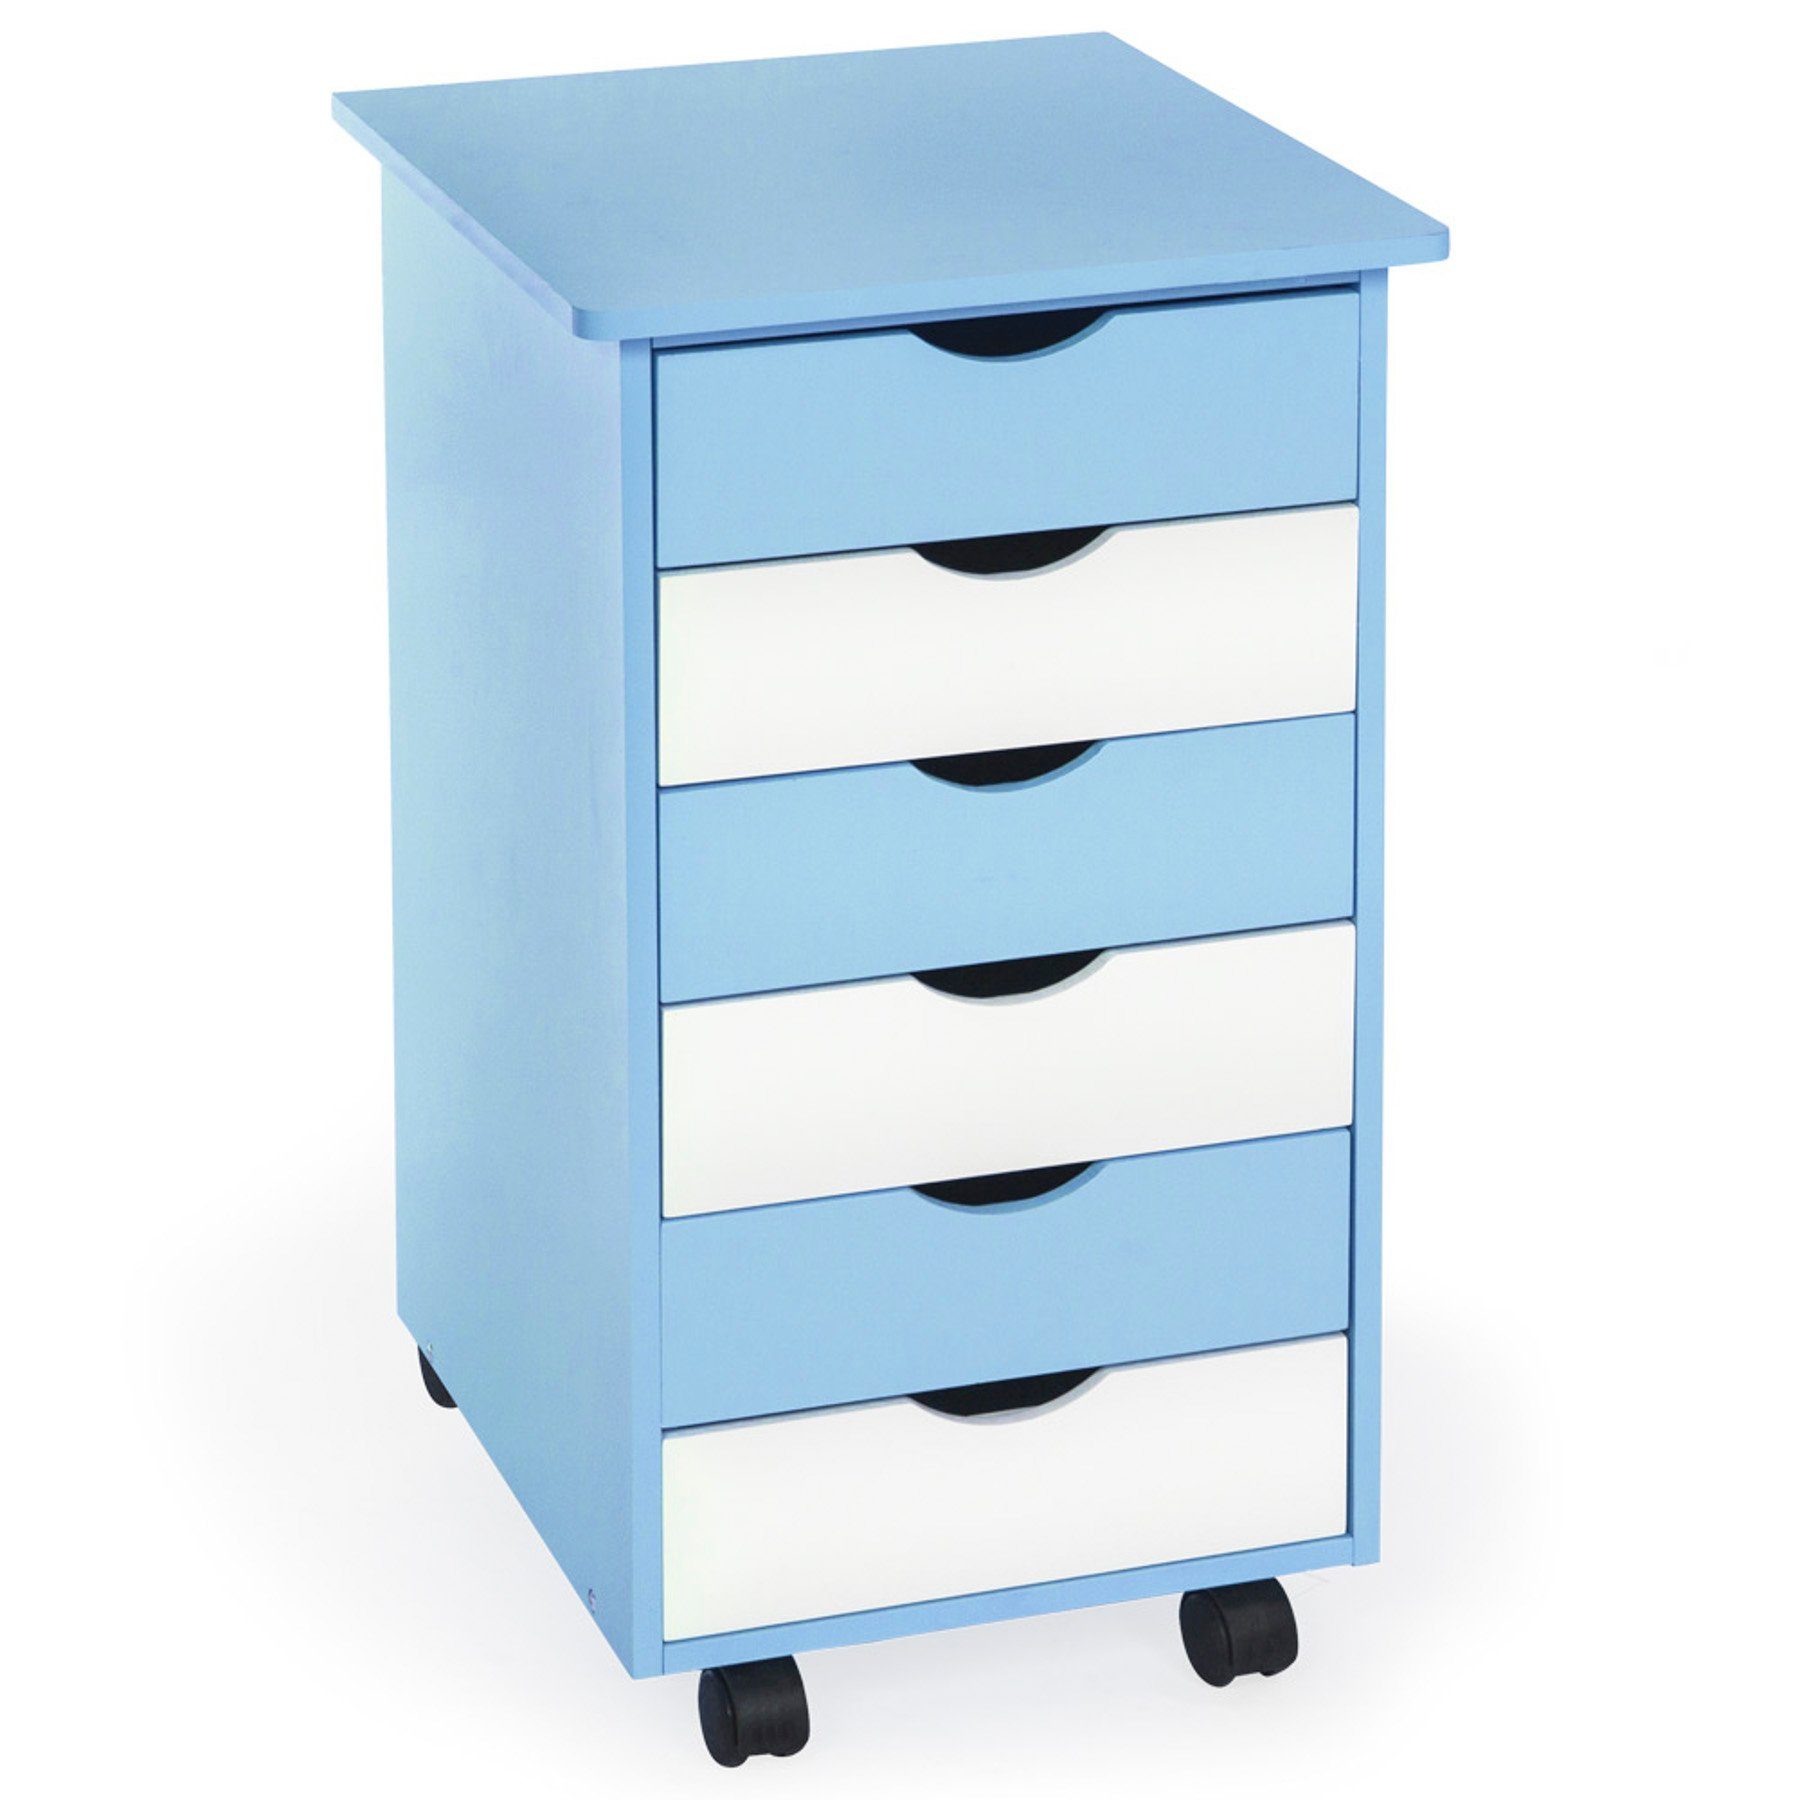 tectake Rollcontainer Rollcontainer aus blau Holz 65x36x40cm